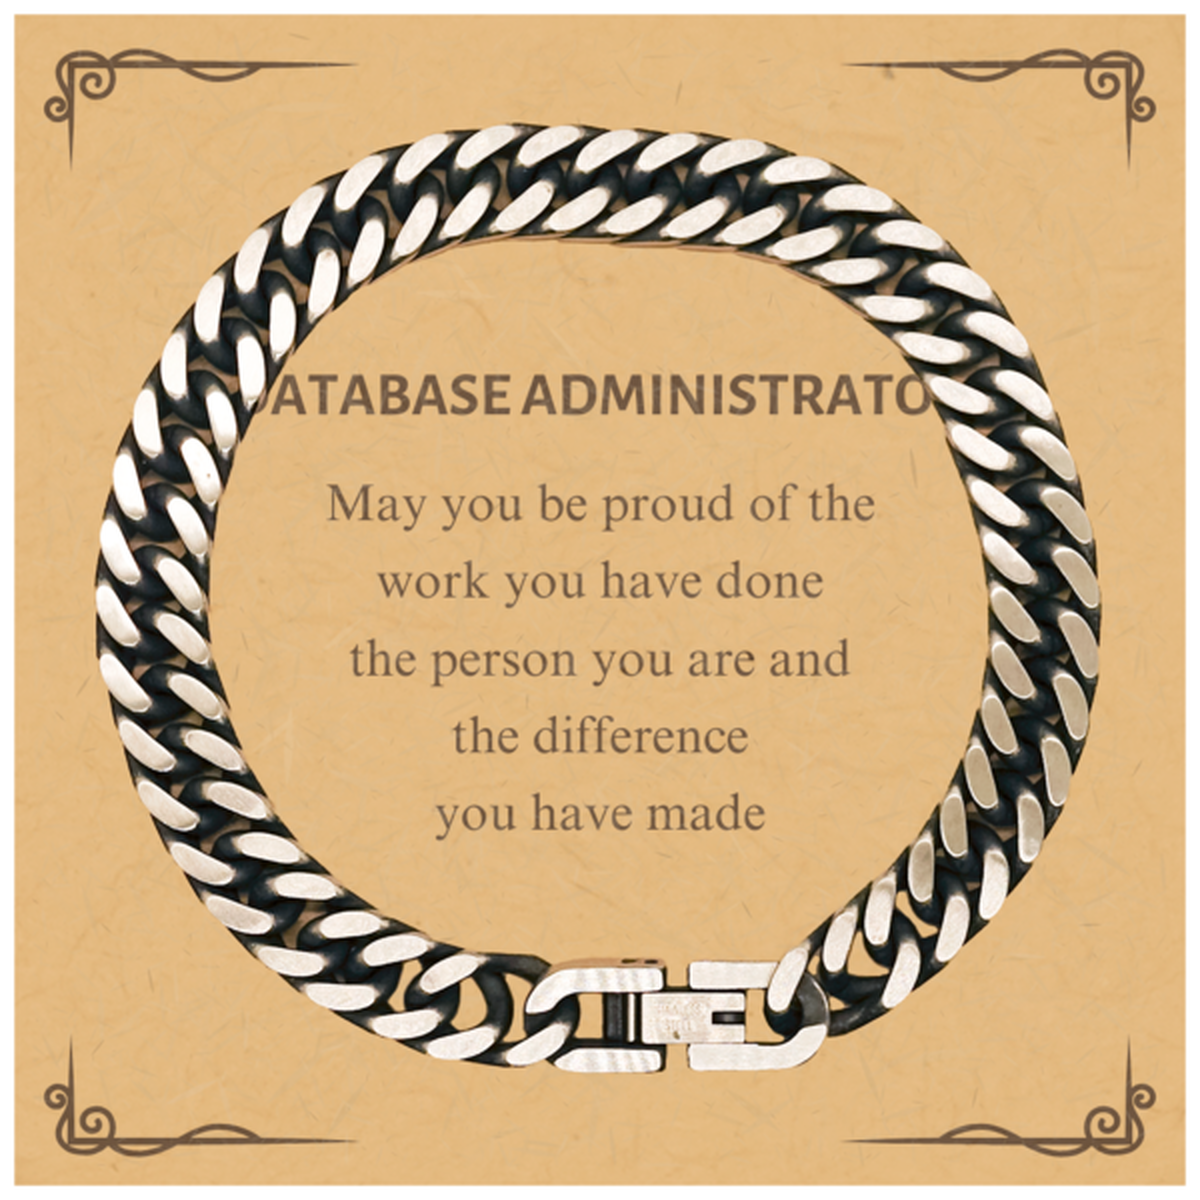 Database Administrator May you be proud of the work you have done, Retirement Database Administrator Cuban Link Chain Bracelet for Colleague Appreciation Gifts Amazing for Database Administrator